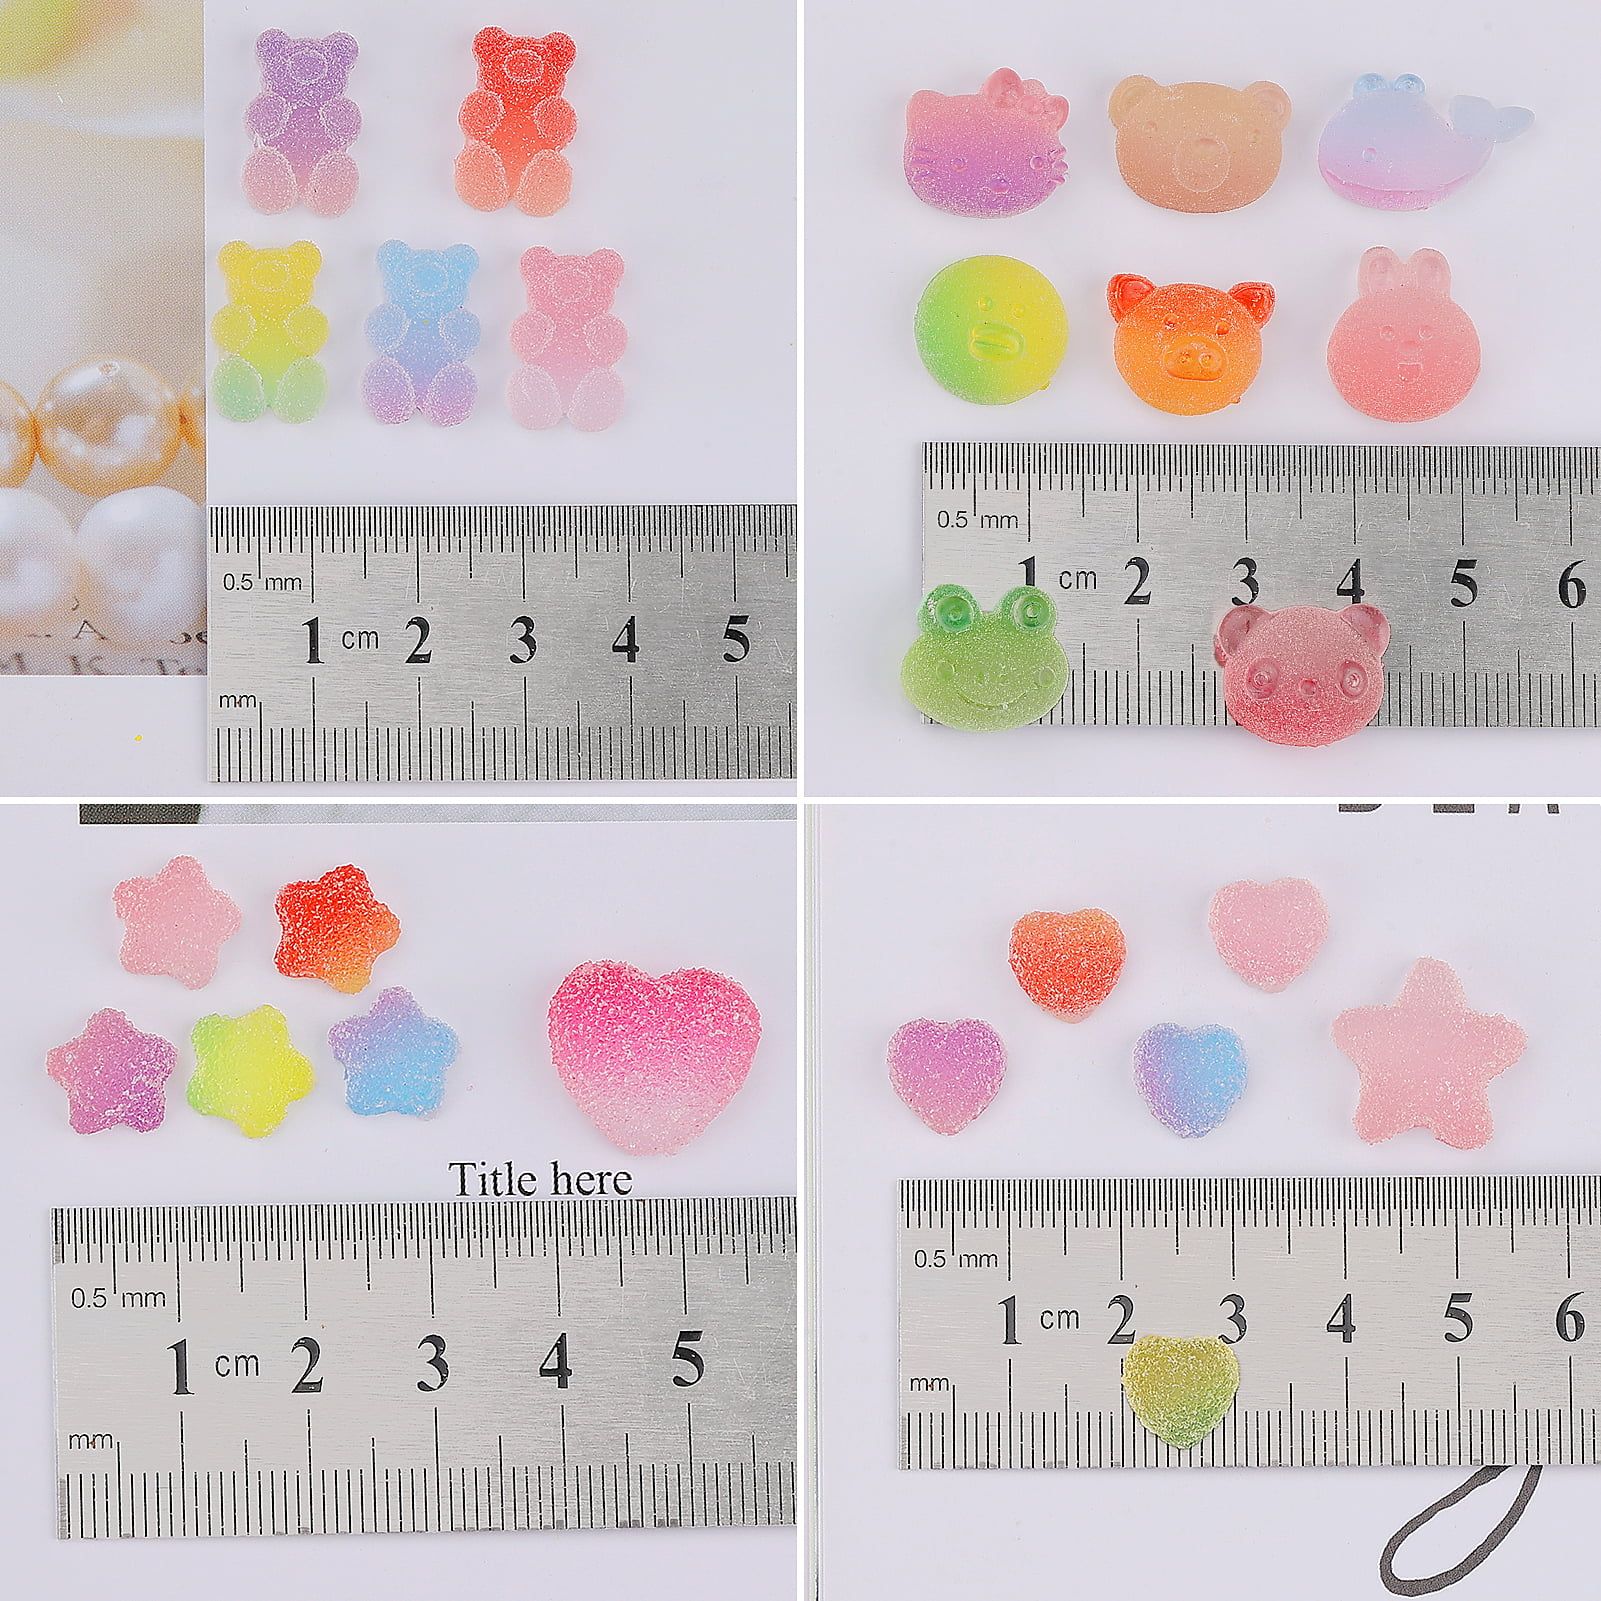  Gorvalin 105Pcs Kawaii Resin Charms, 3D Sweety Pink Flatback  Resins Candy Charms for Nail Art Valentine Crafts Decoration Slime Making  Ornament DIY Supplies for Craft Making : Arts, Crafts & Sewing